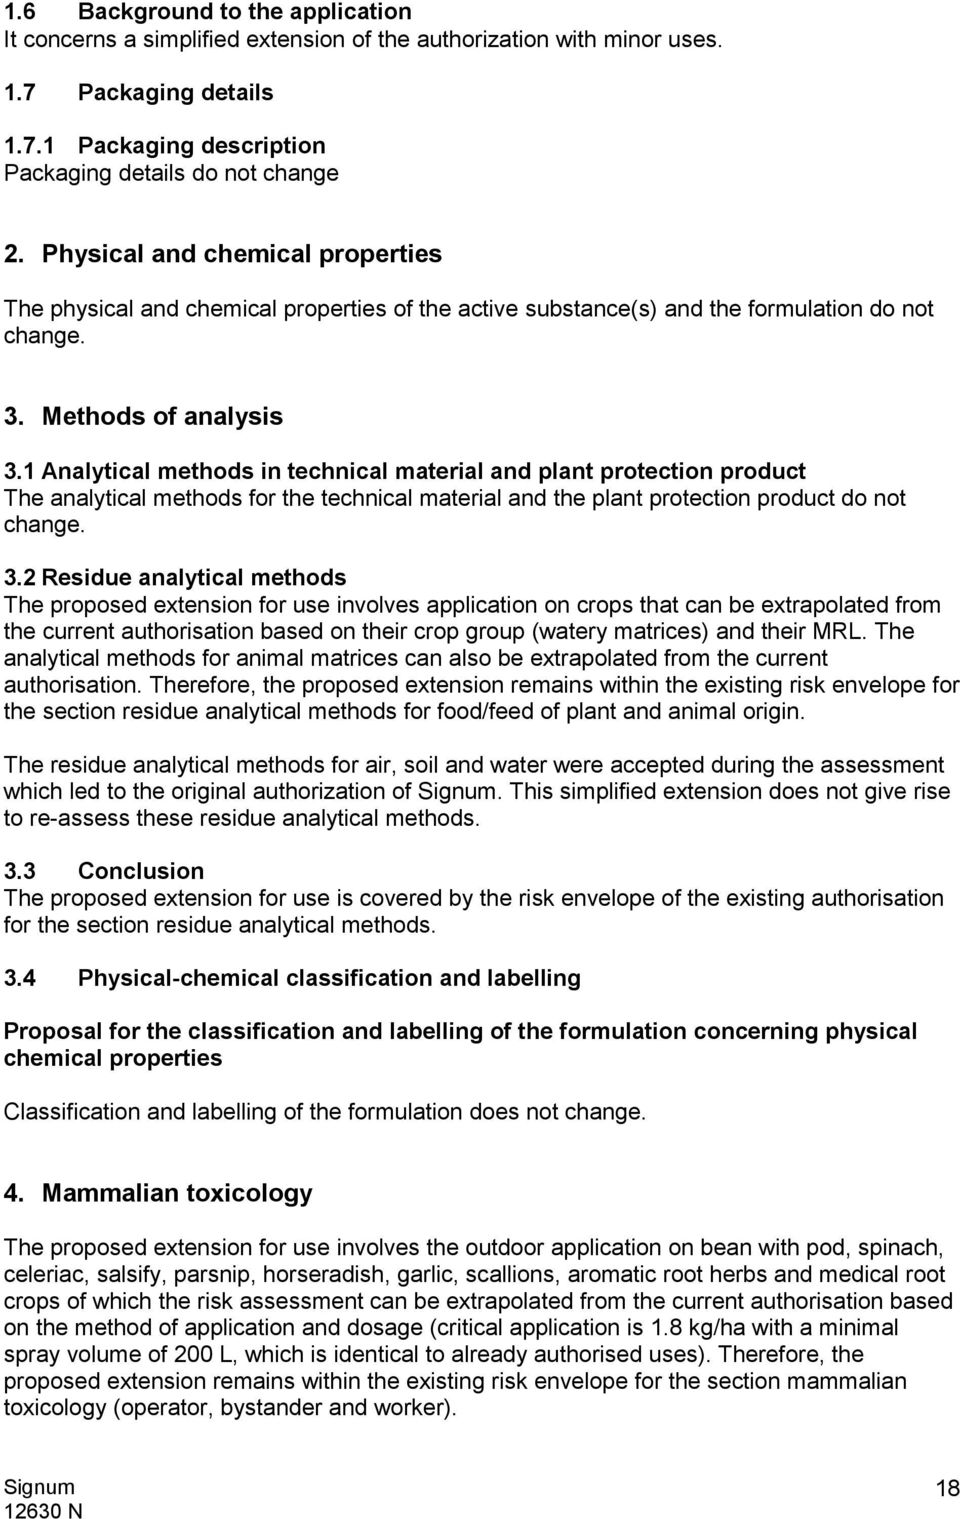 1 Analytical methods in technical material and plant protection product The analytical methods for the technical material and the plant protection product do not change. 3.